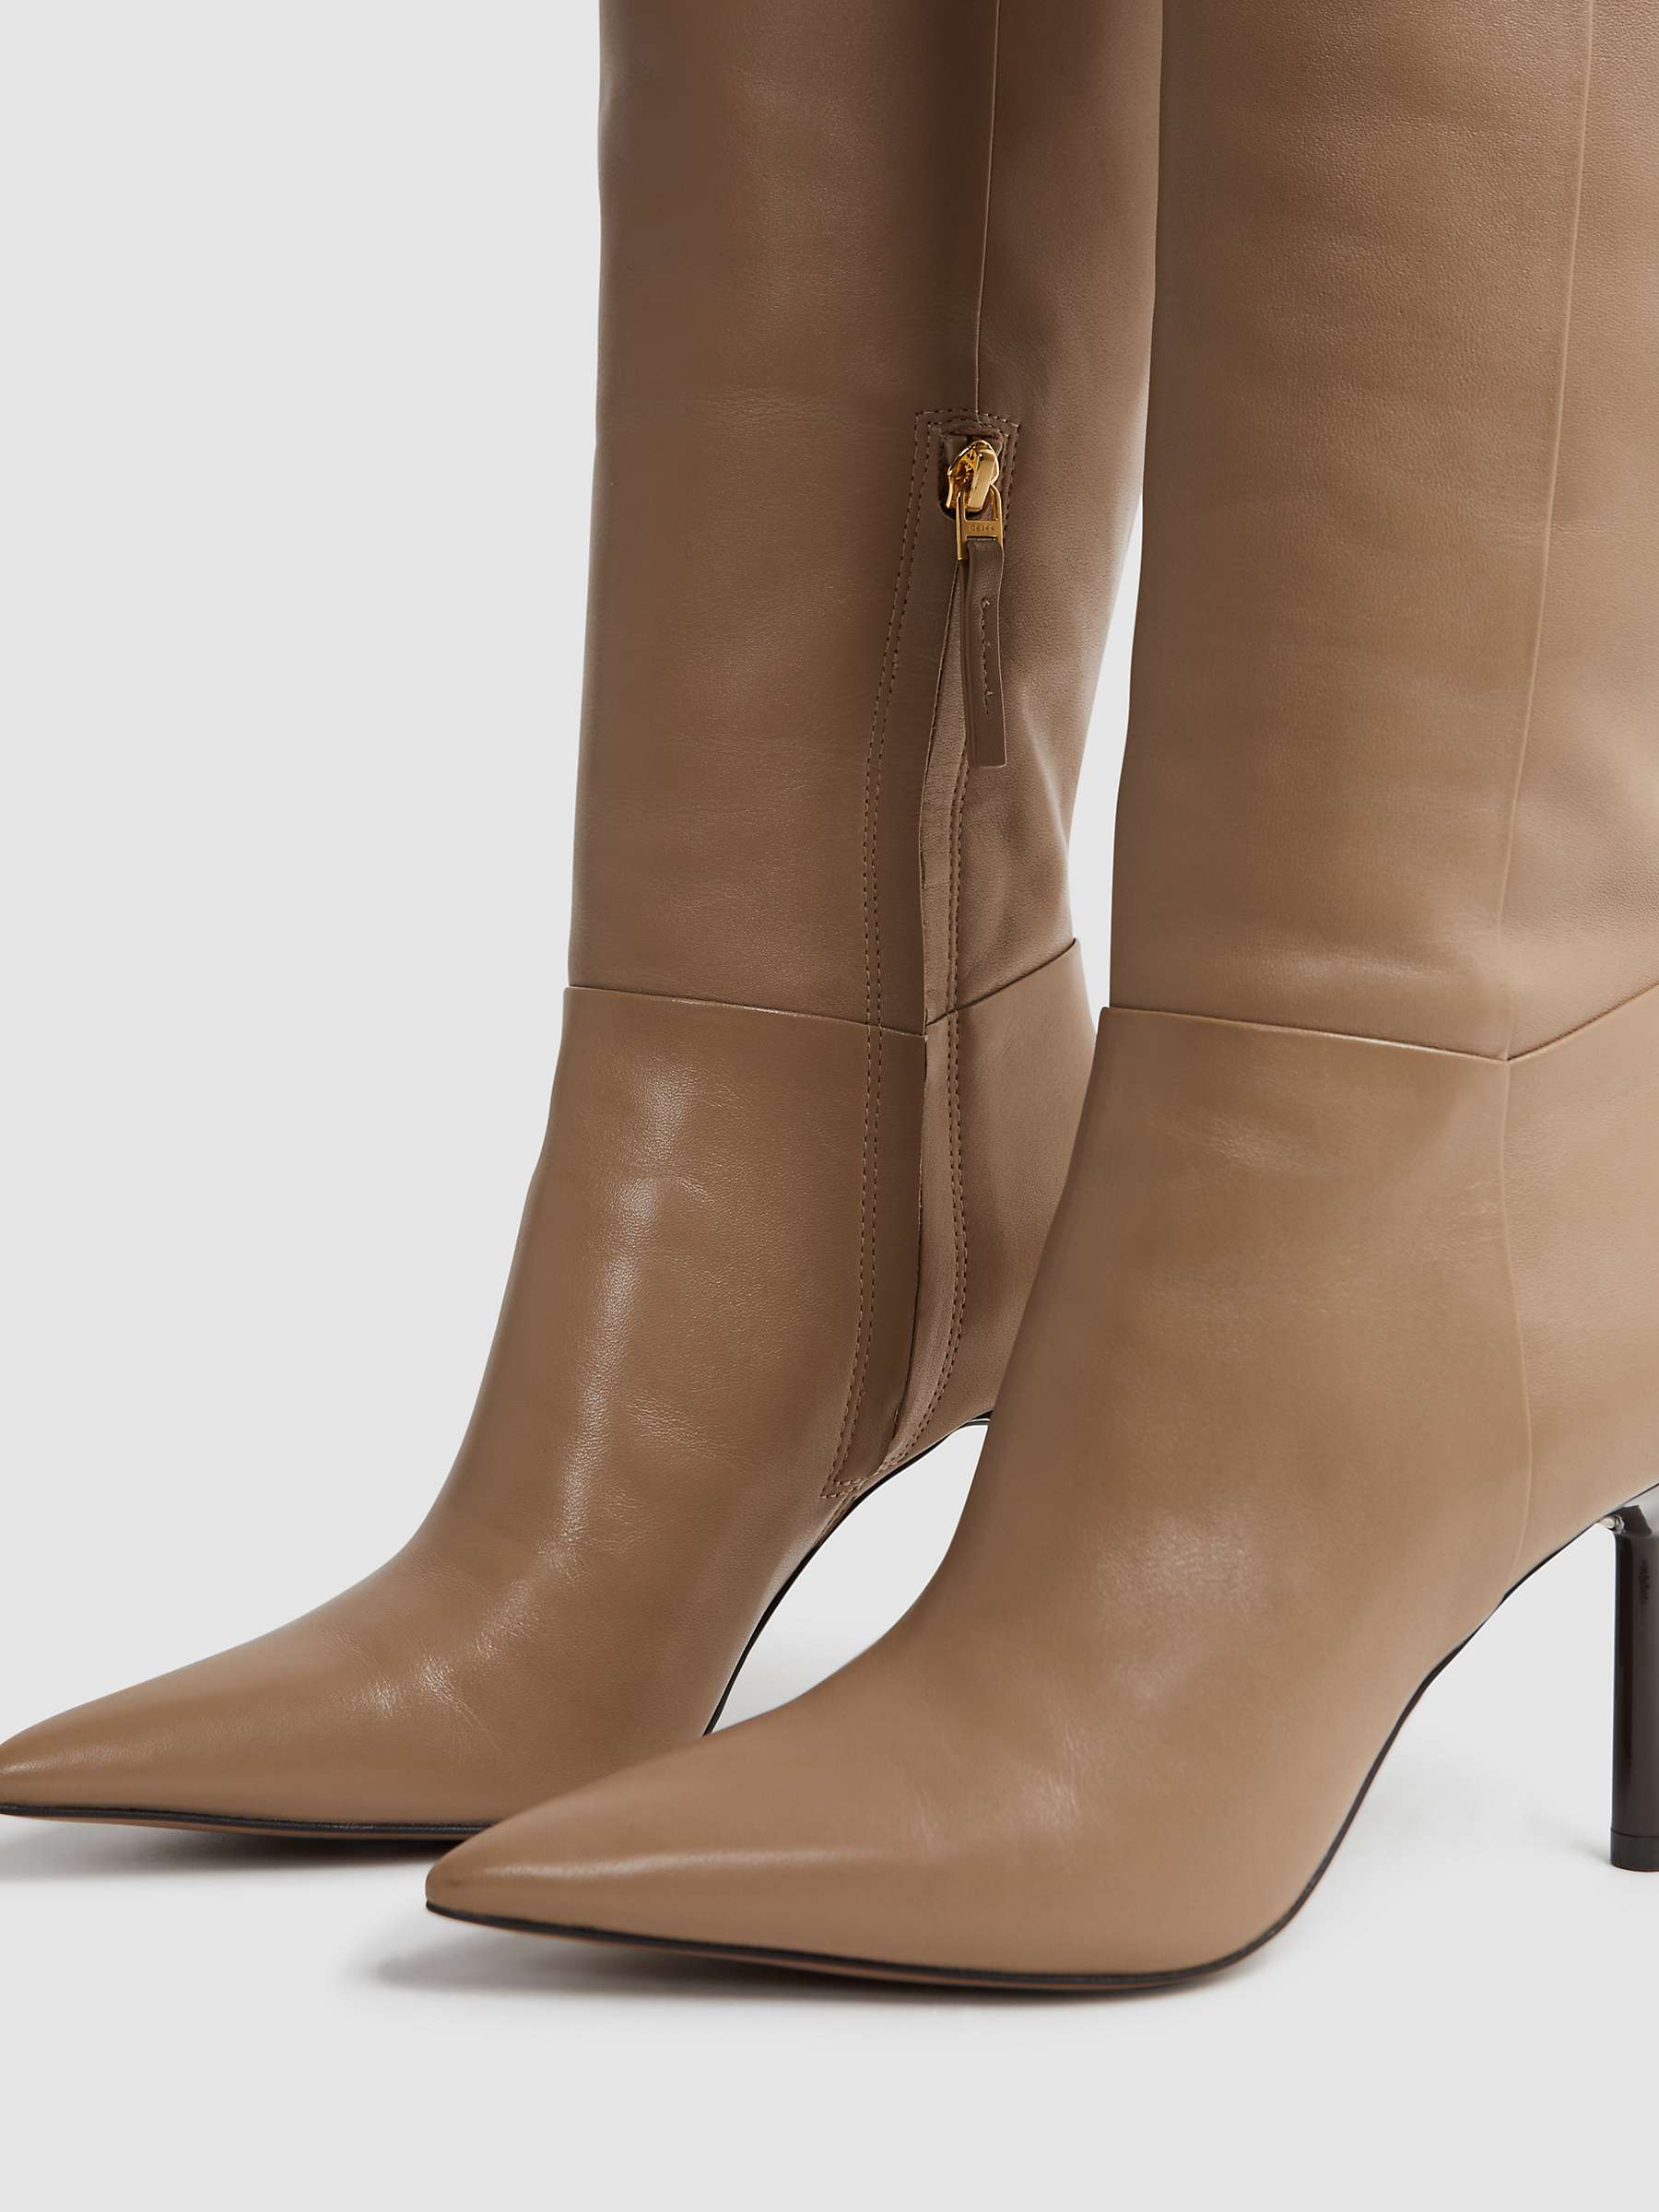 Buy Reiss Gracyn High Heel Leather Knee High Boots Online at johnlewis.com